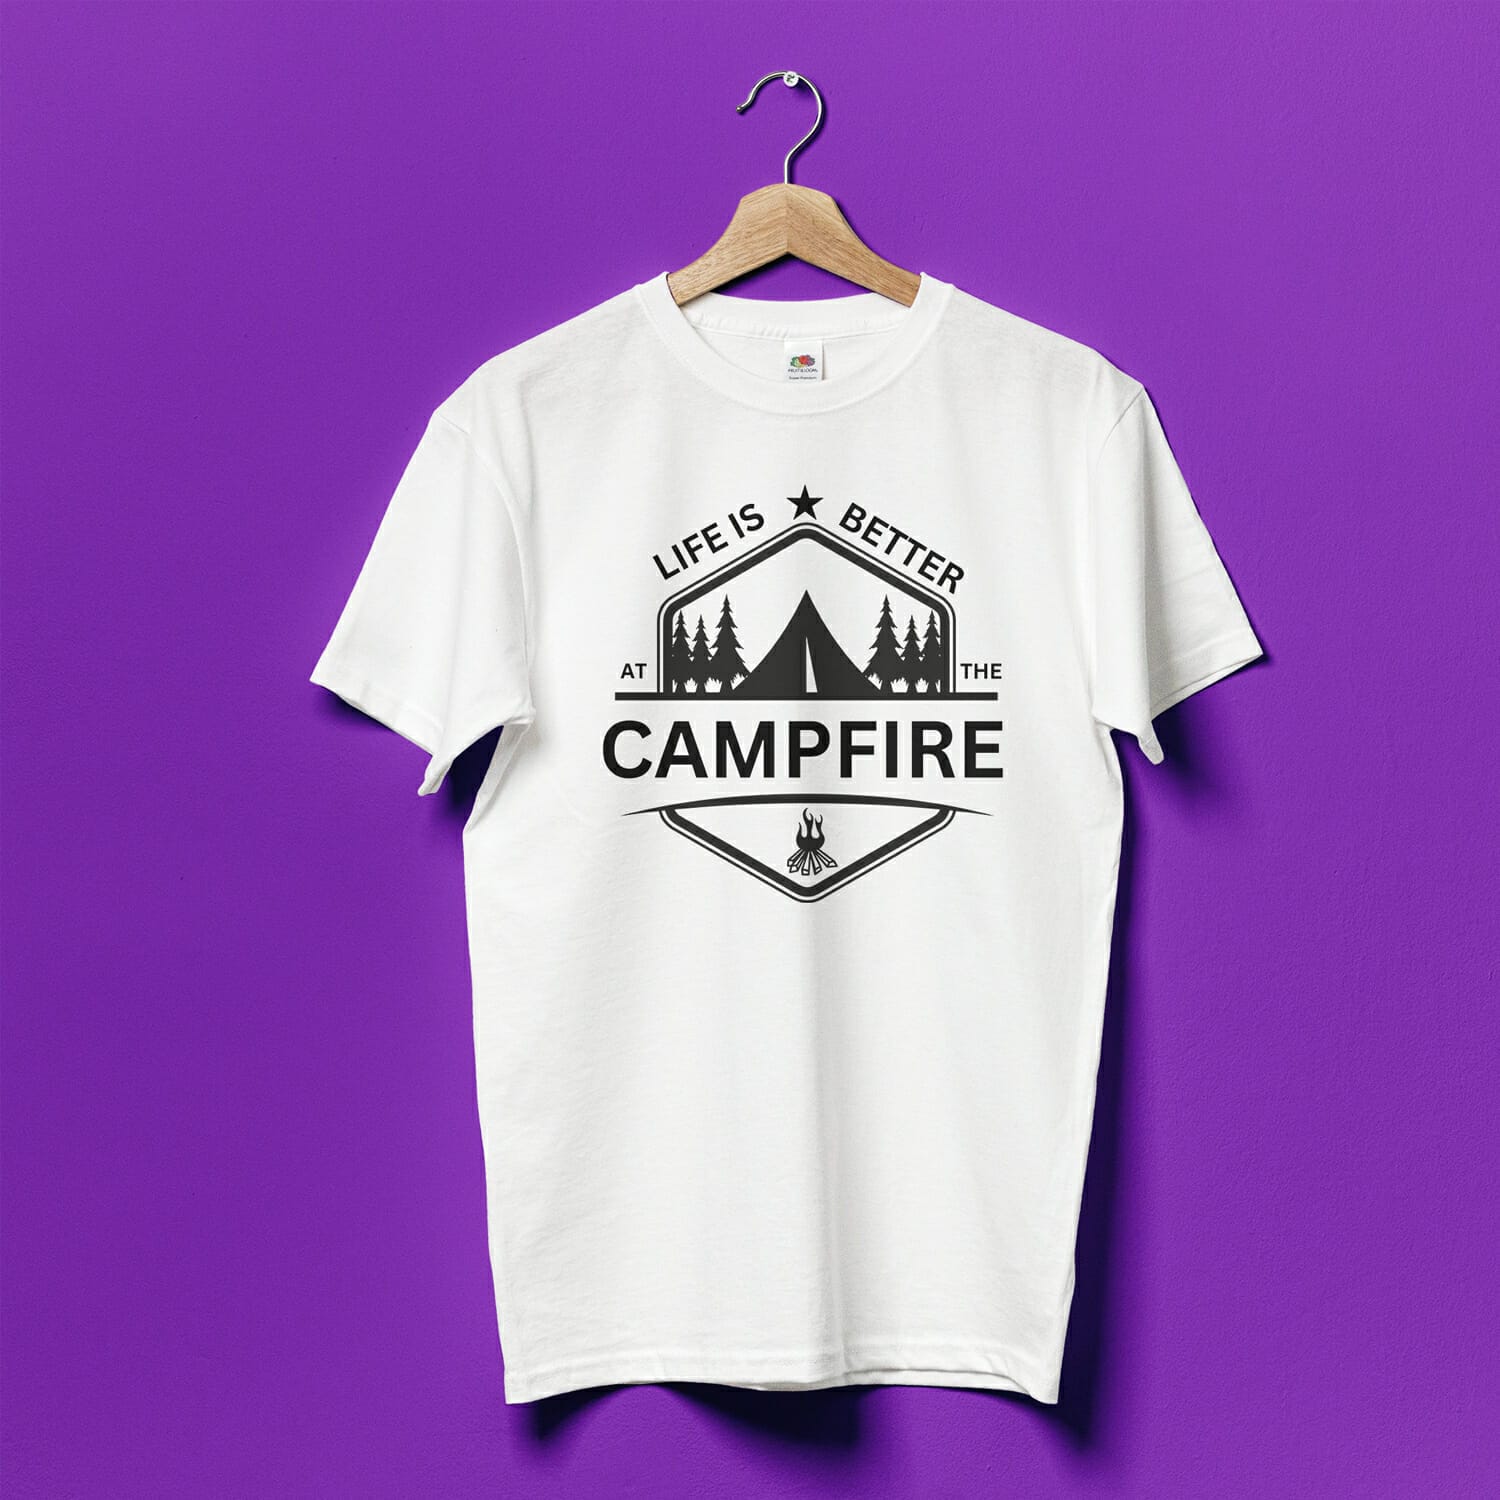 Life is better at the campfire tshirt design